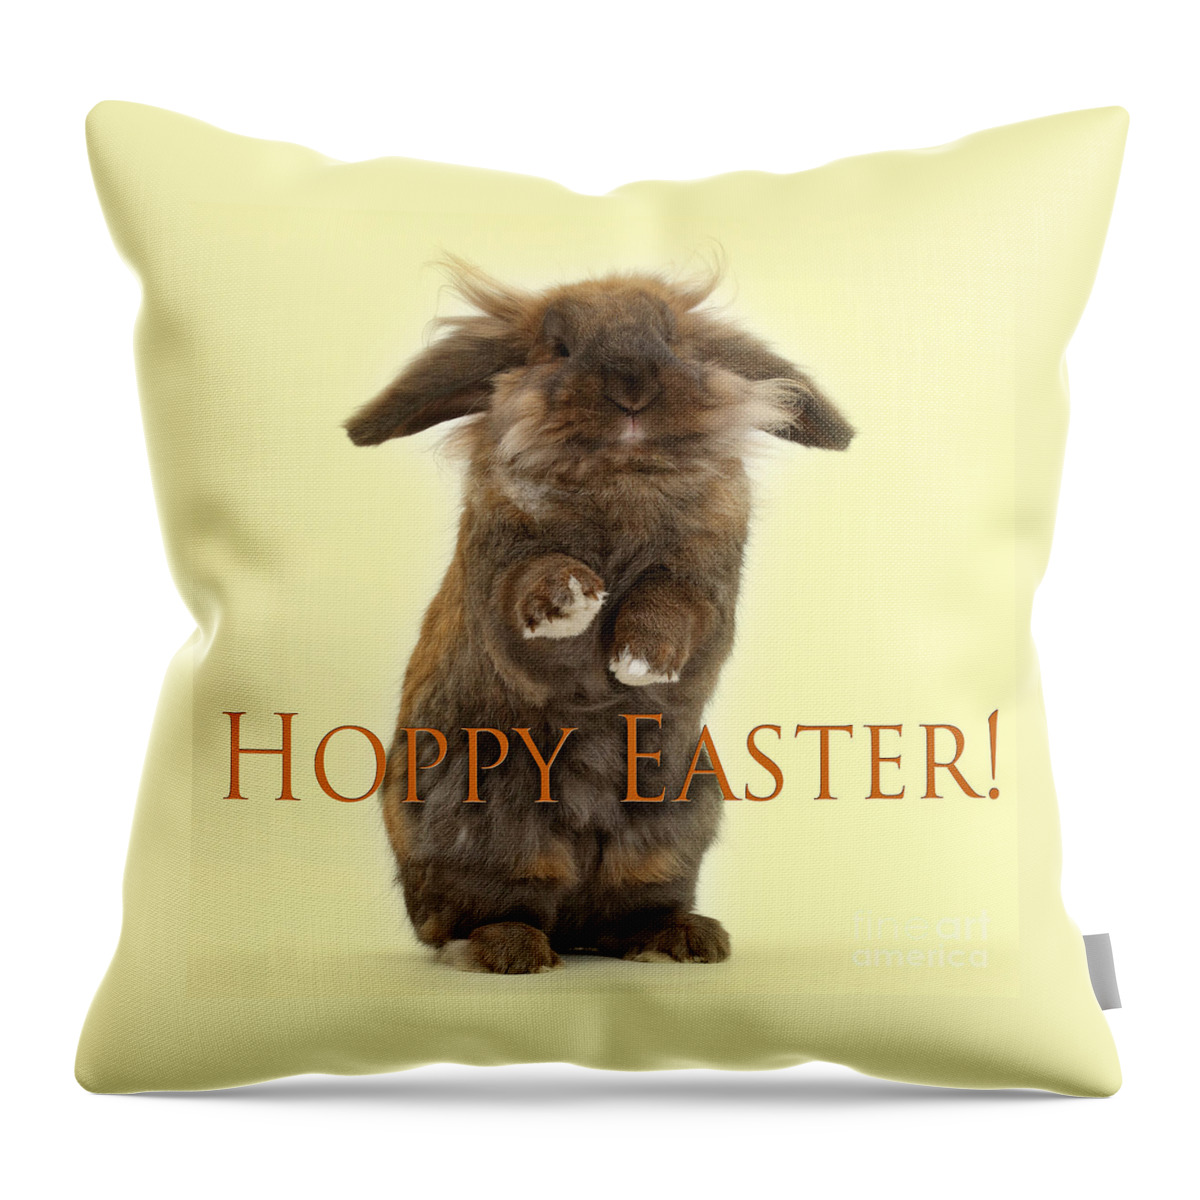 Hoppy Easter Throw Pillow featuring the photograph Hoppy Easter by Warren Photographic